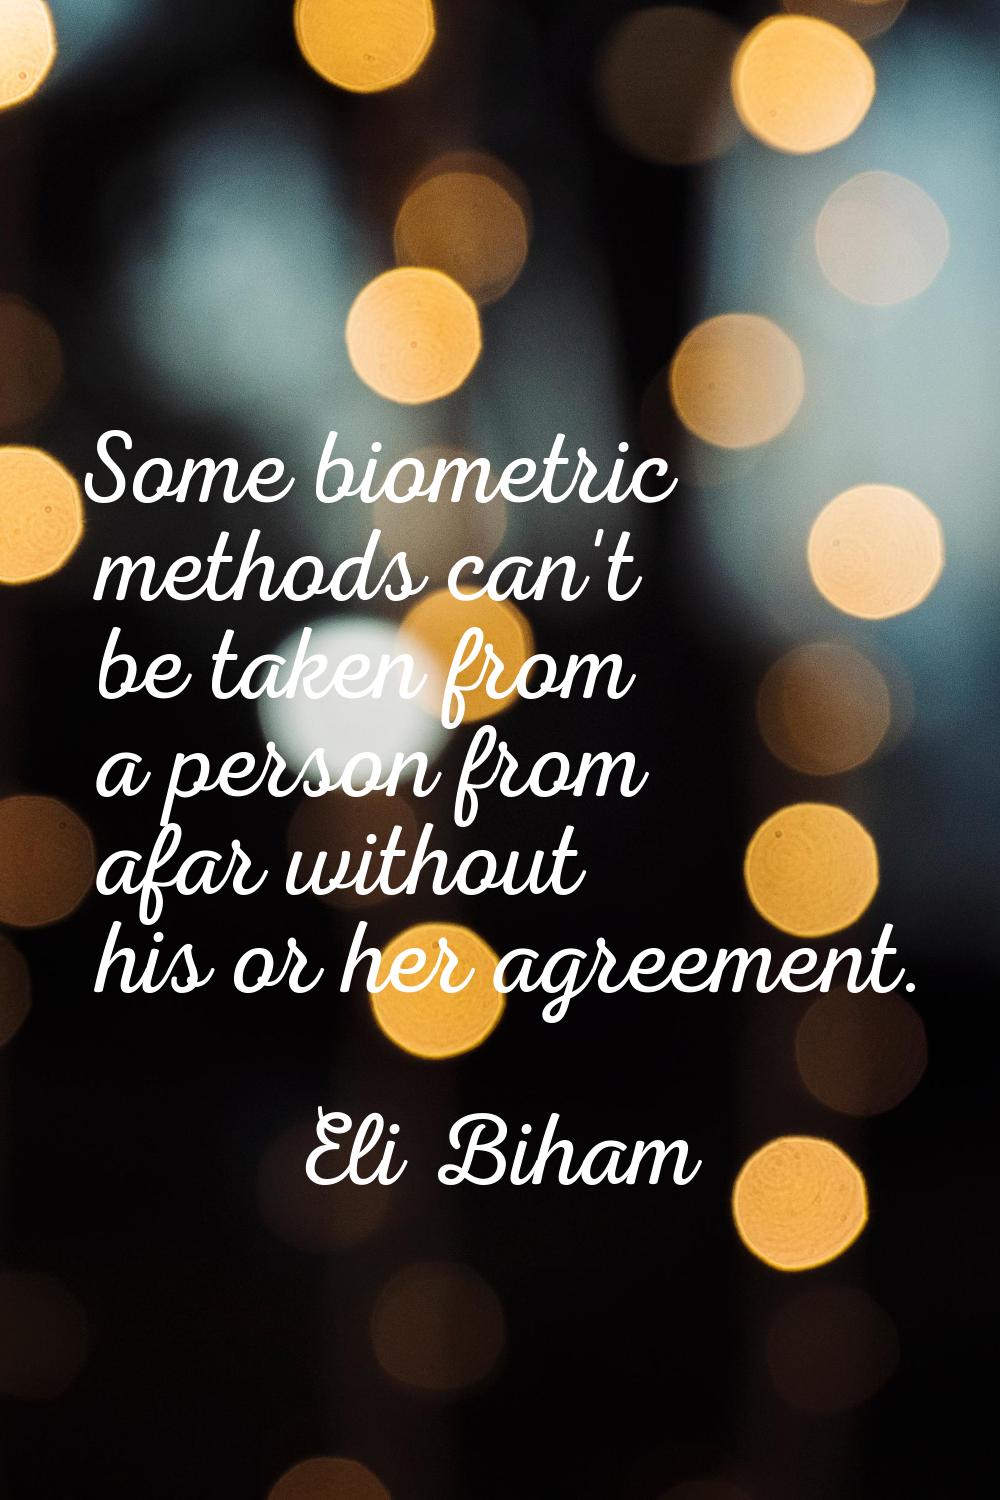 Some biometric methods can't be taken from a person from afar without his or her agreement.